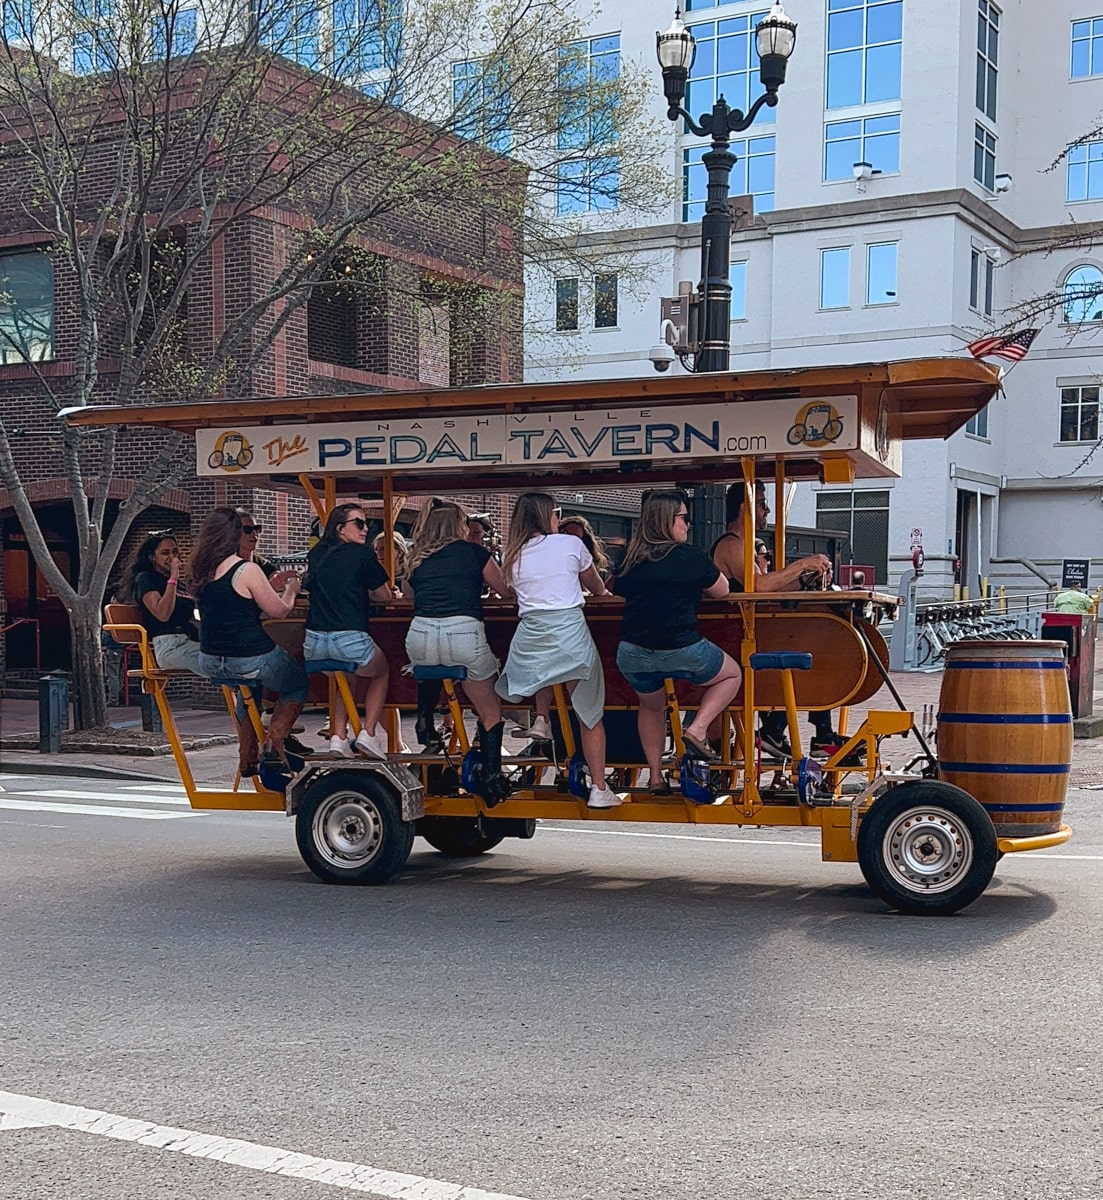 a bachelorette party on the pedal tavern in downtown nashville tn